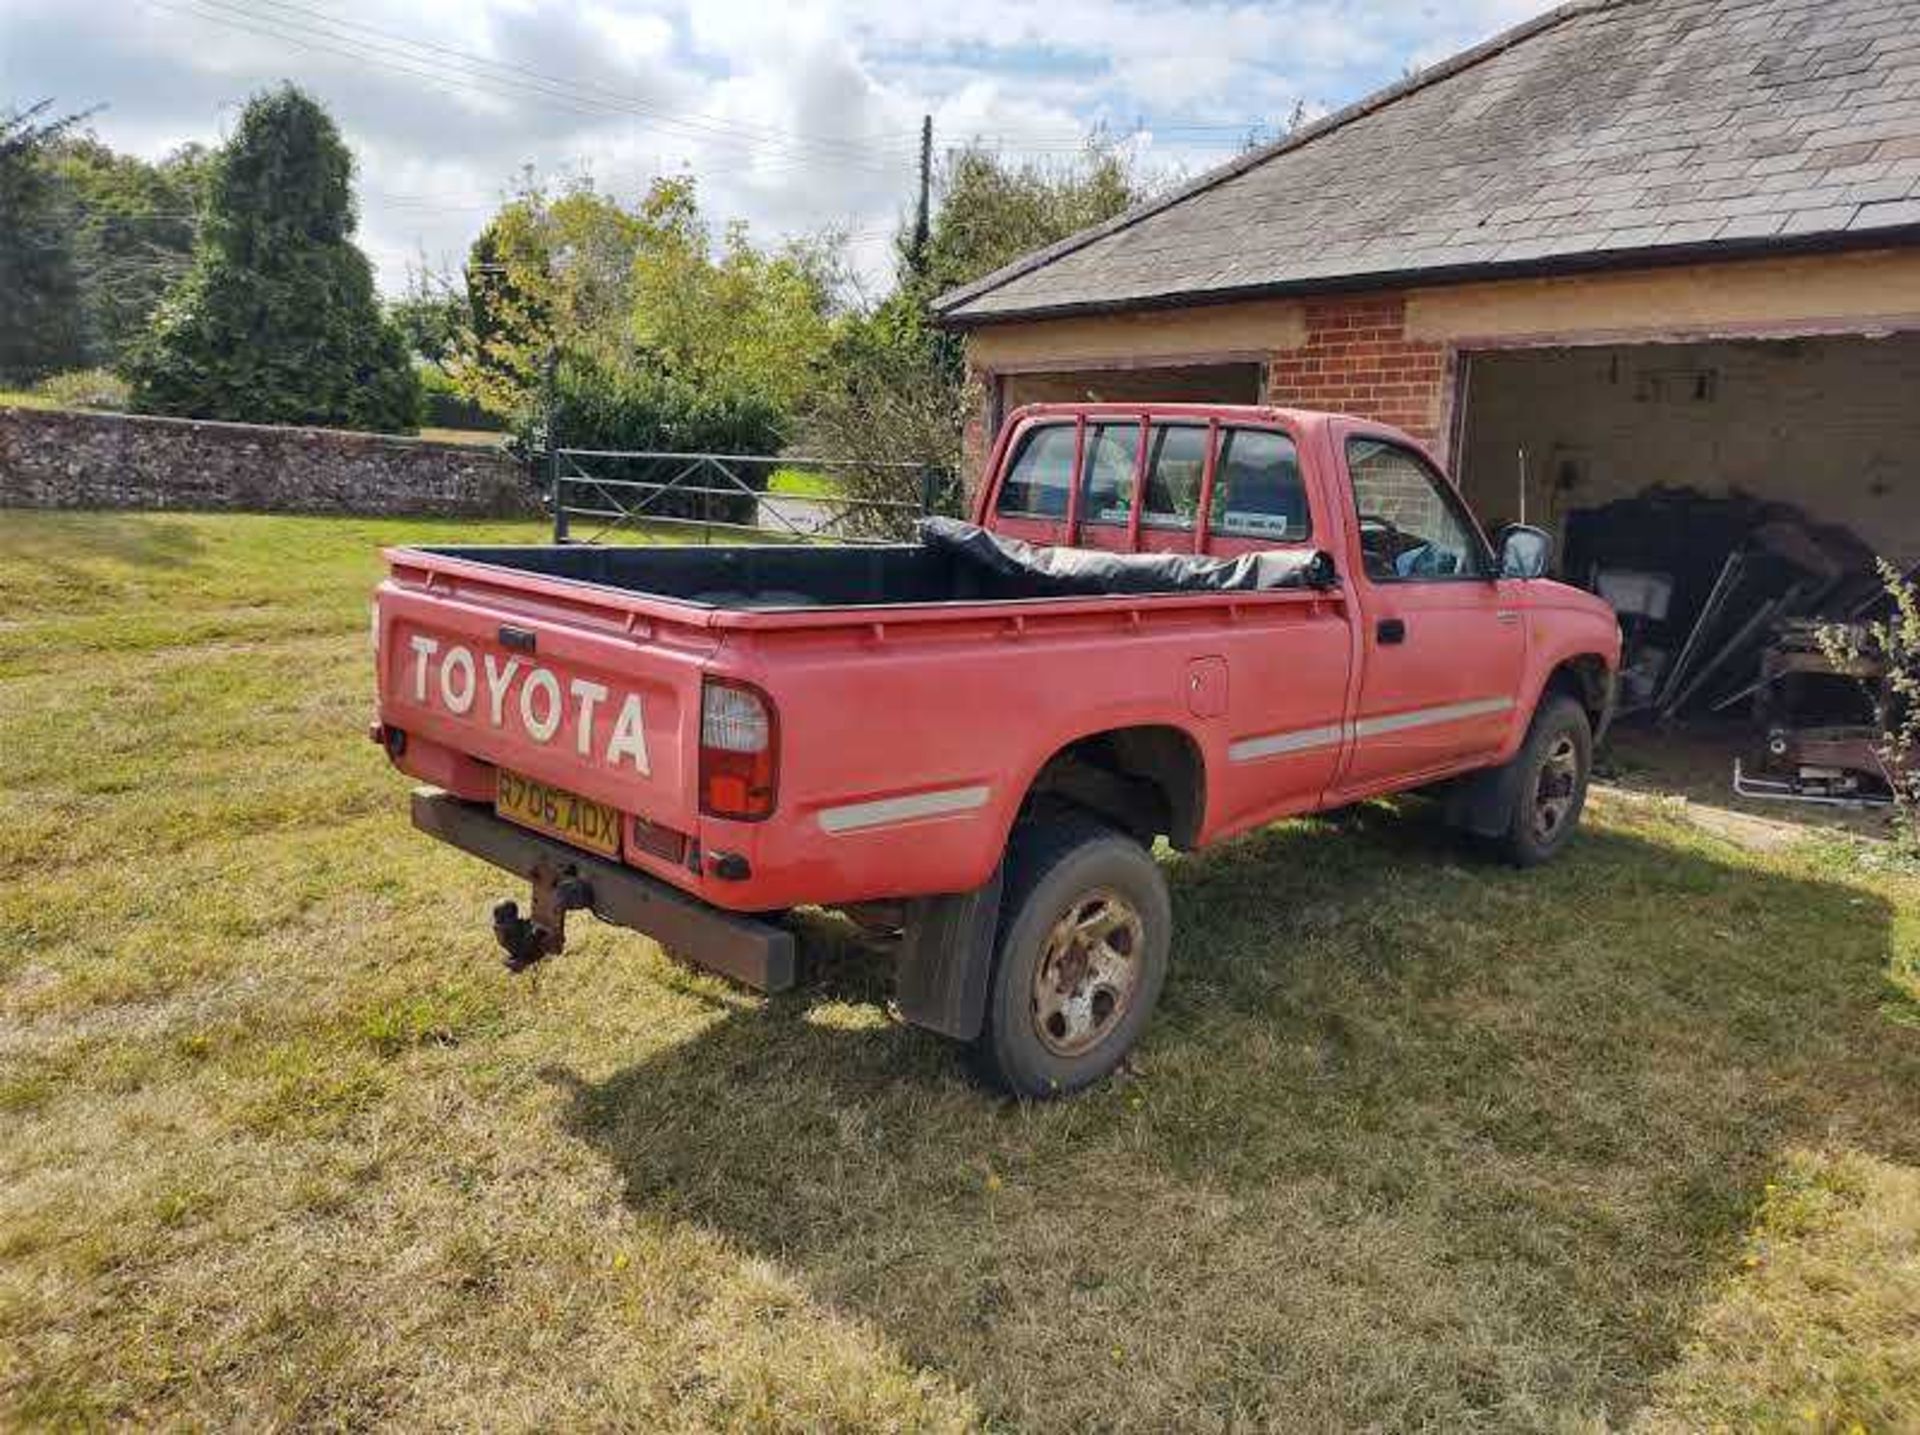 Toyota Hilux 2.4TD 4WD Pickup with 131,180 Miles (Reg. No. R706 ADX) MOT Valid Until 07/12/ - Image 2 of 4